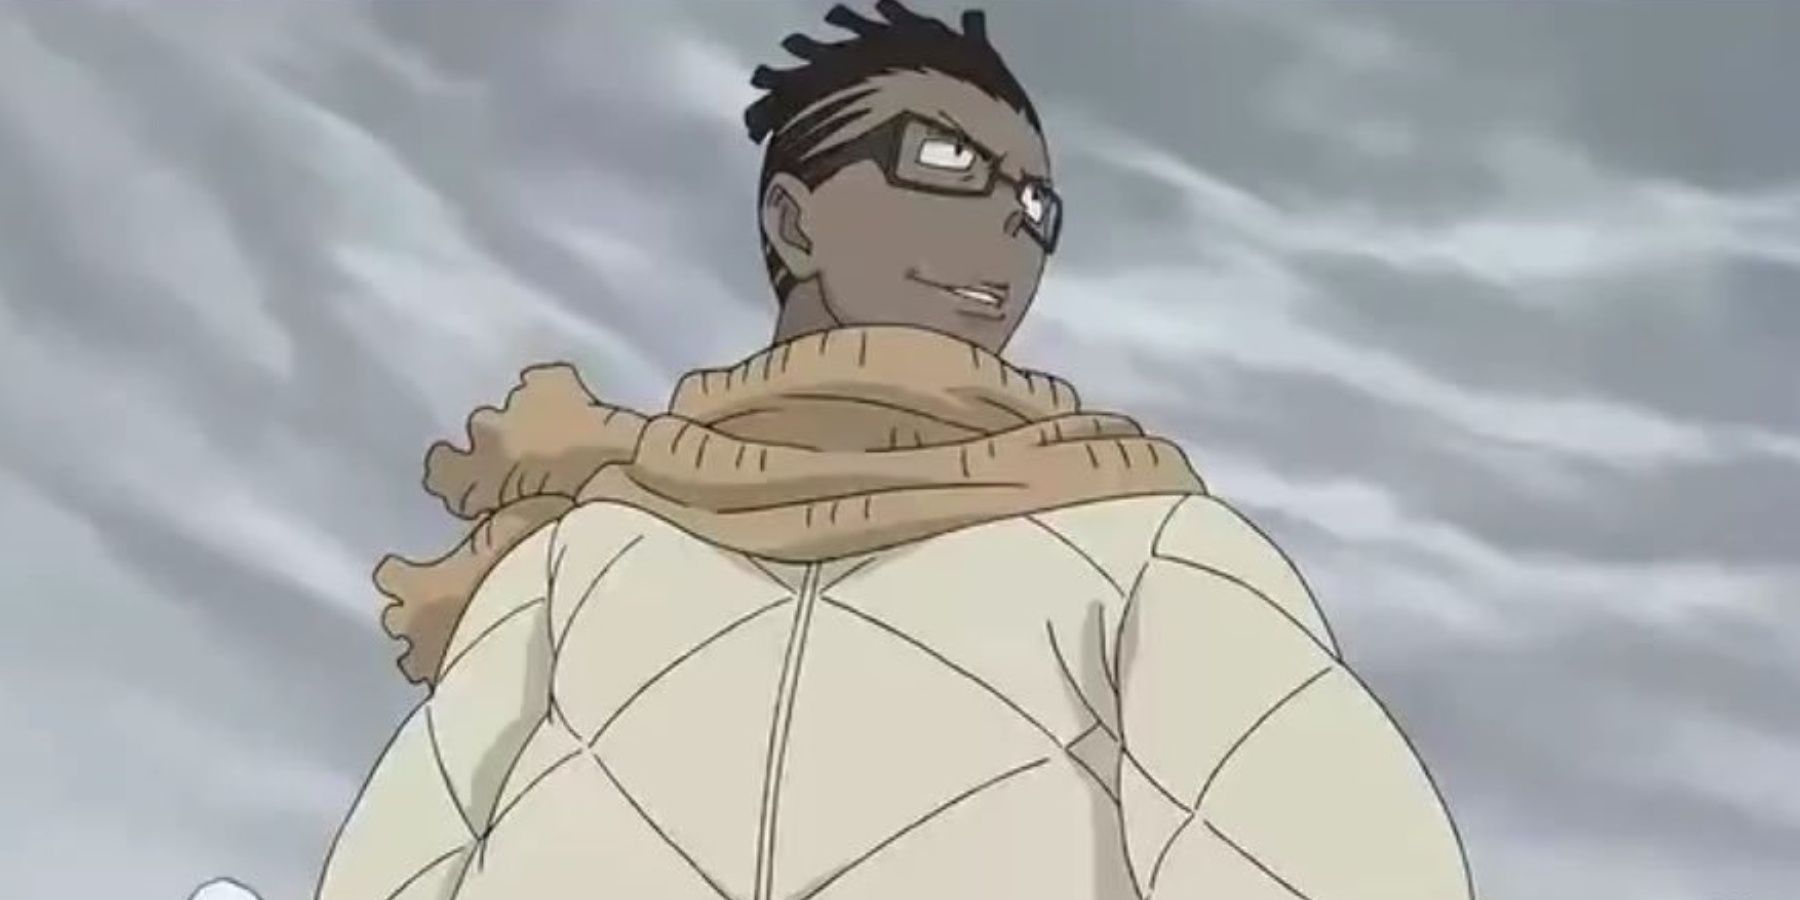 X Best Black Anime Characters Kilik Rung From Soul Eater 